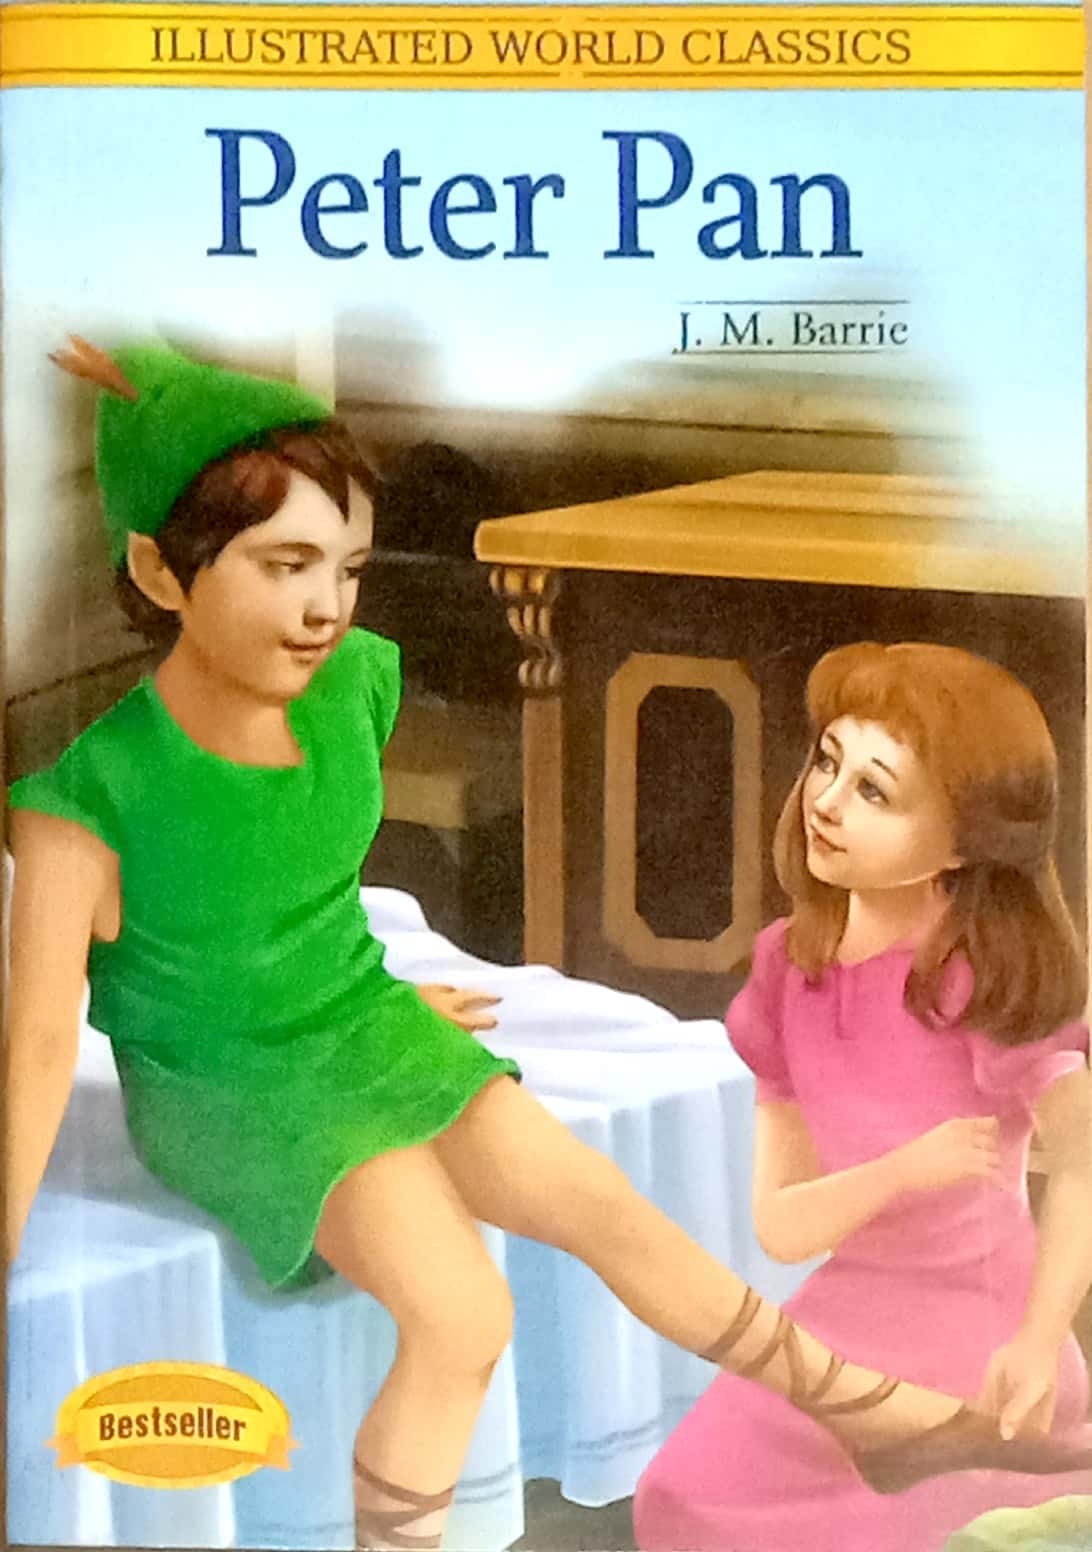 Routemybook - Buy Peter Pan - J.M.Barrie by Nestling Books Online at ...